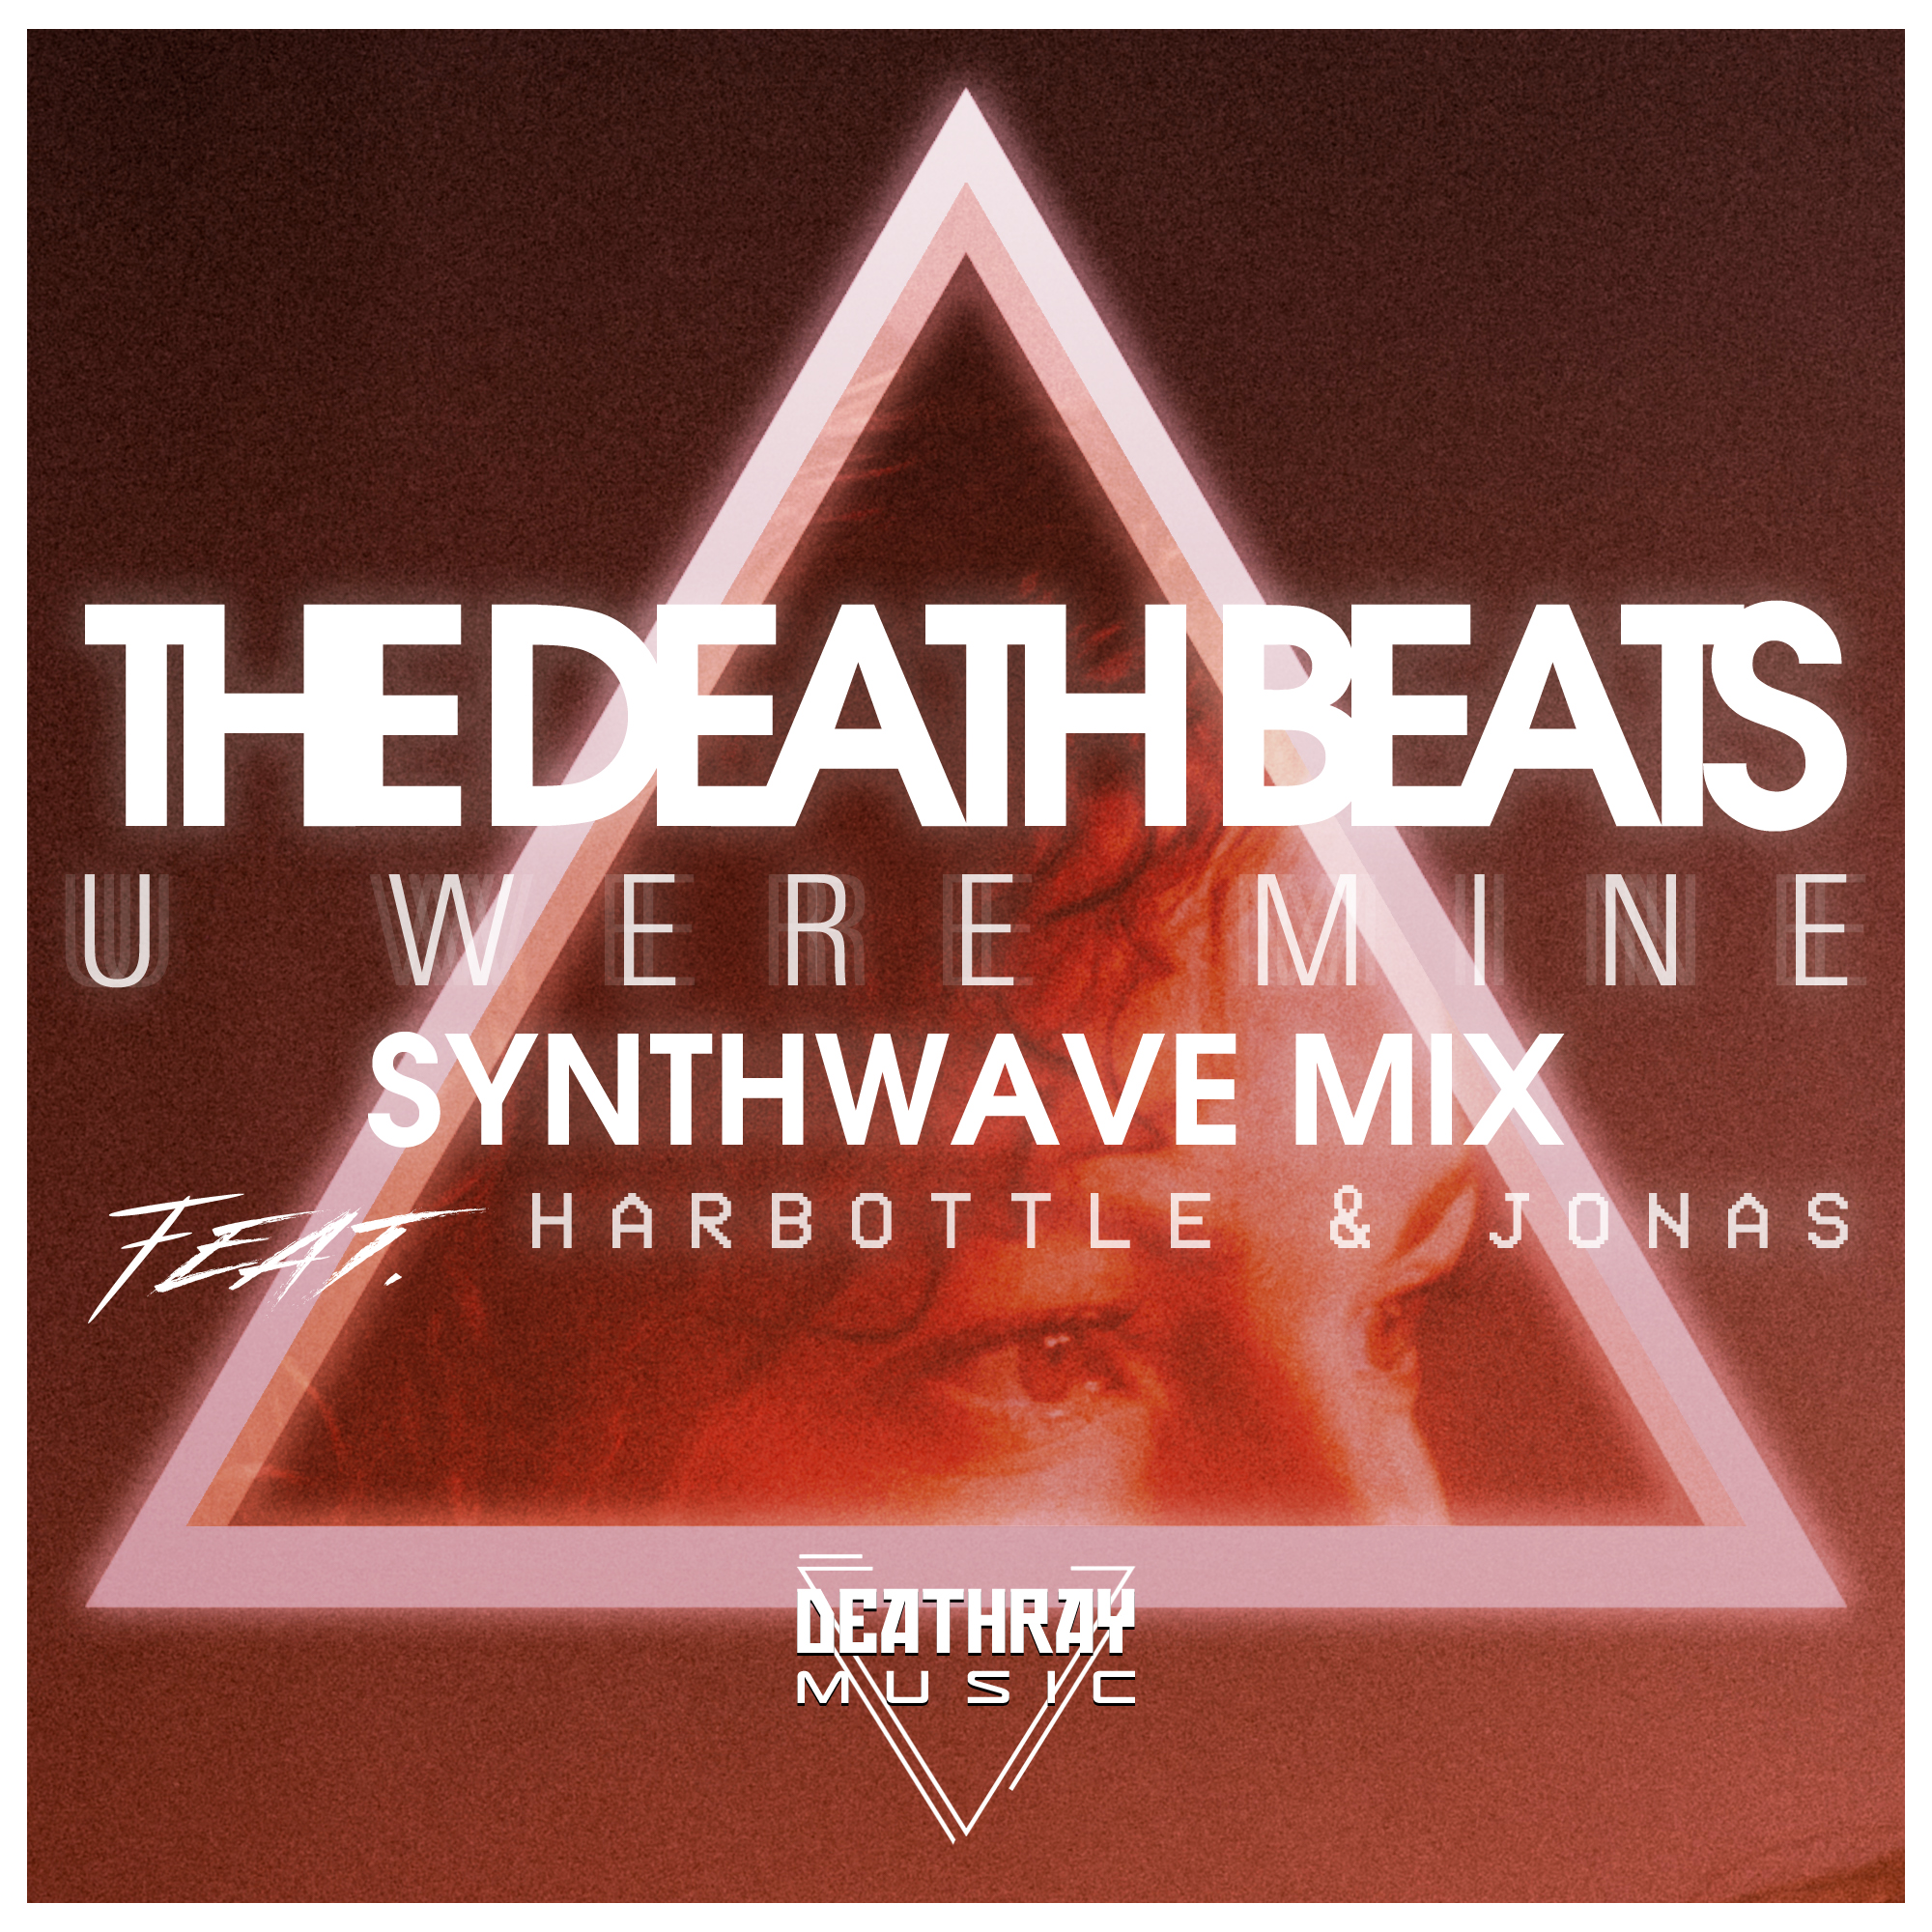 The Death Beats - You Were Mine featuring Harbottle and Jonas - Synthwave Mix